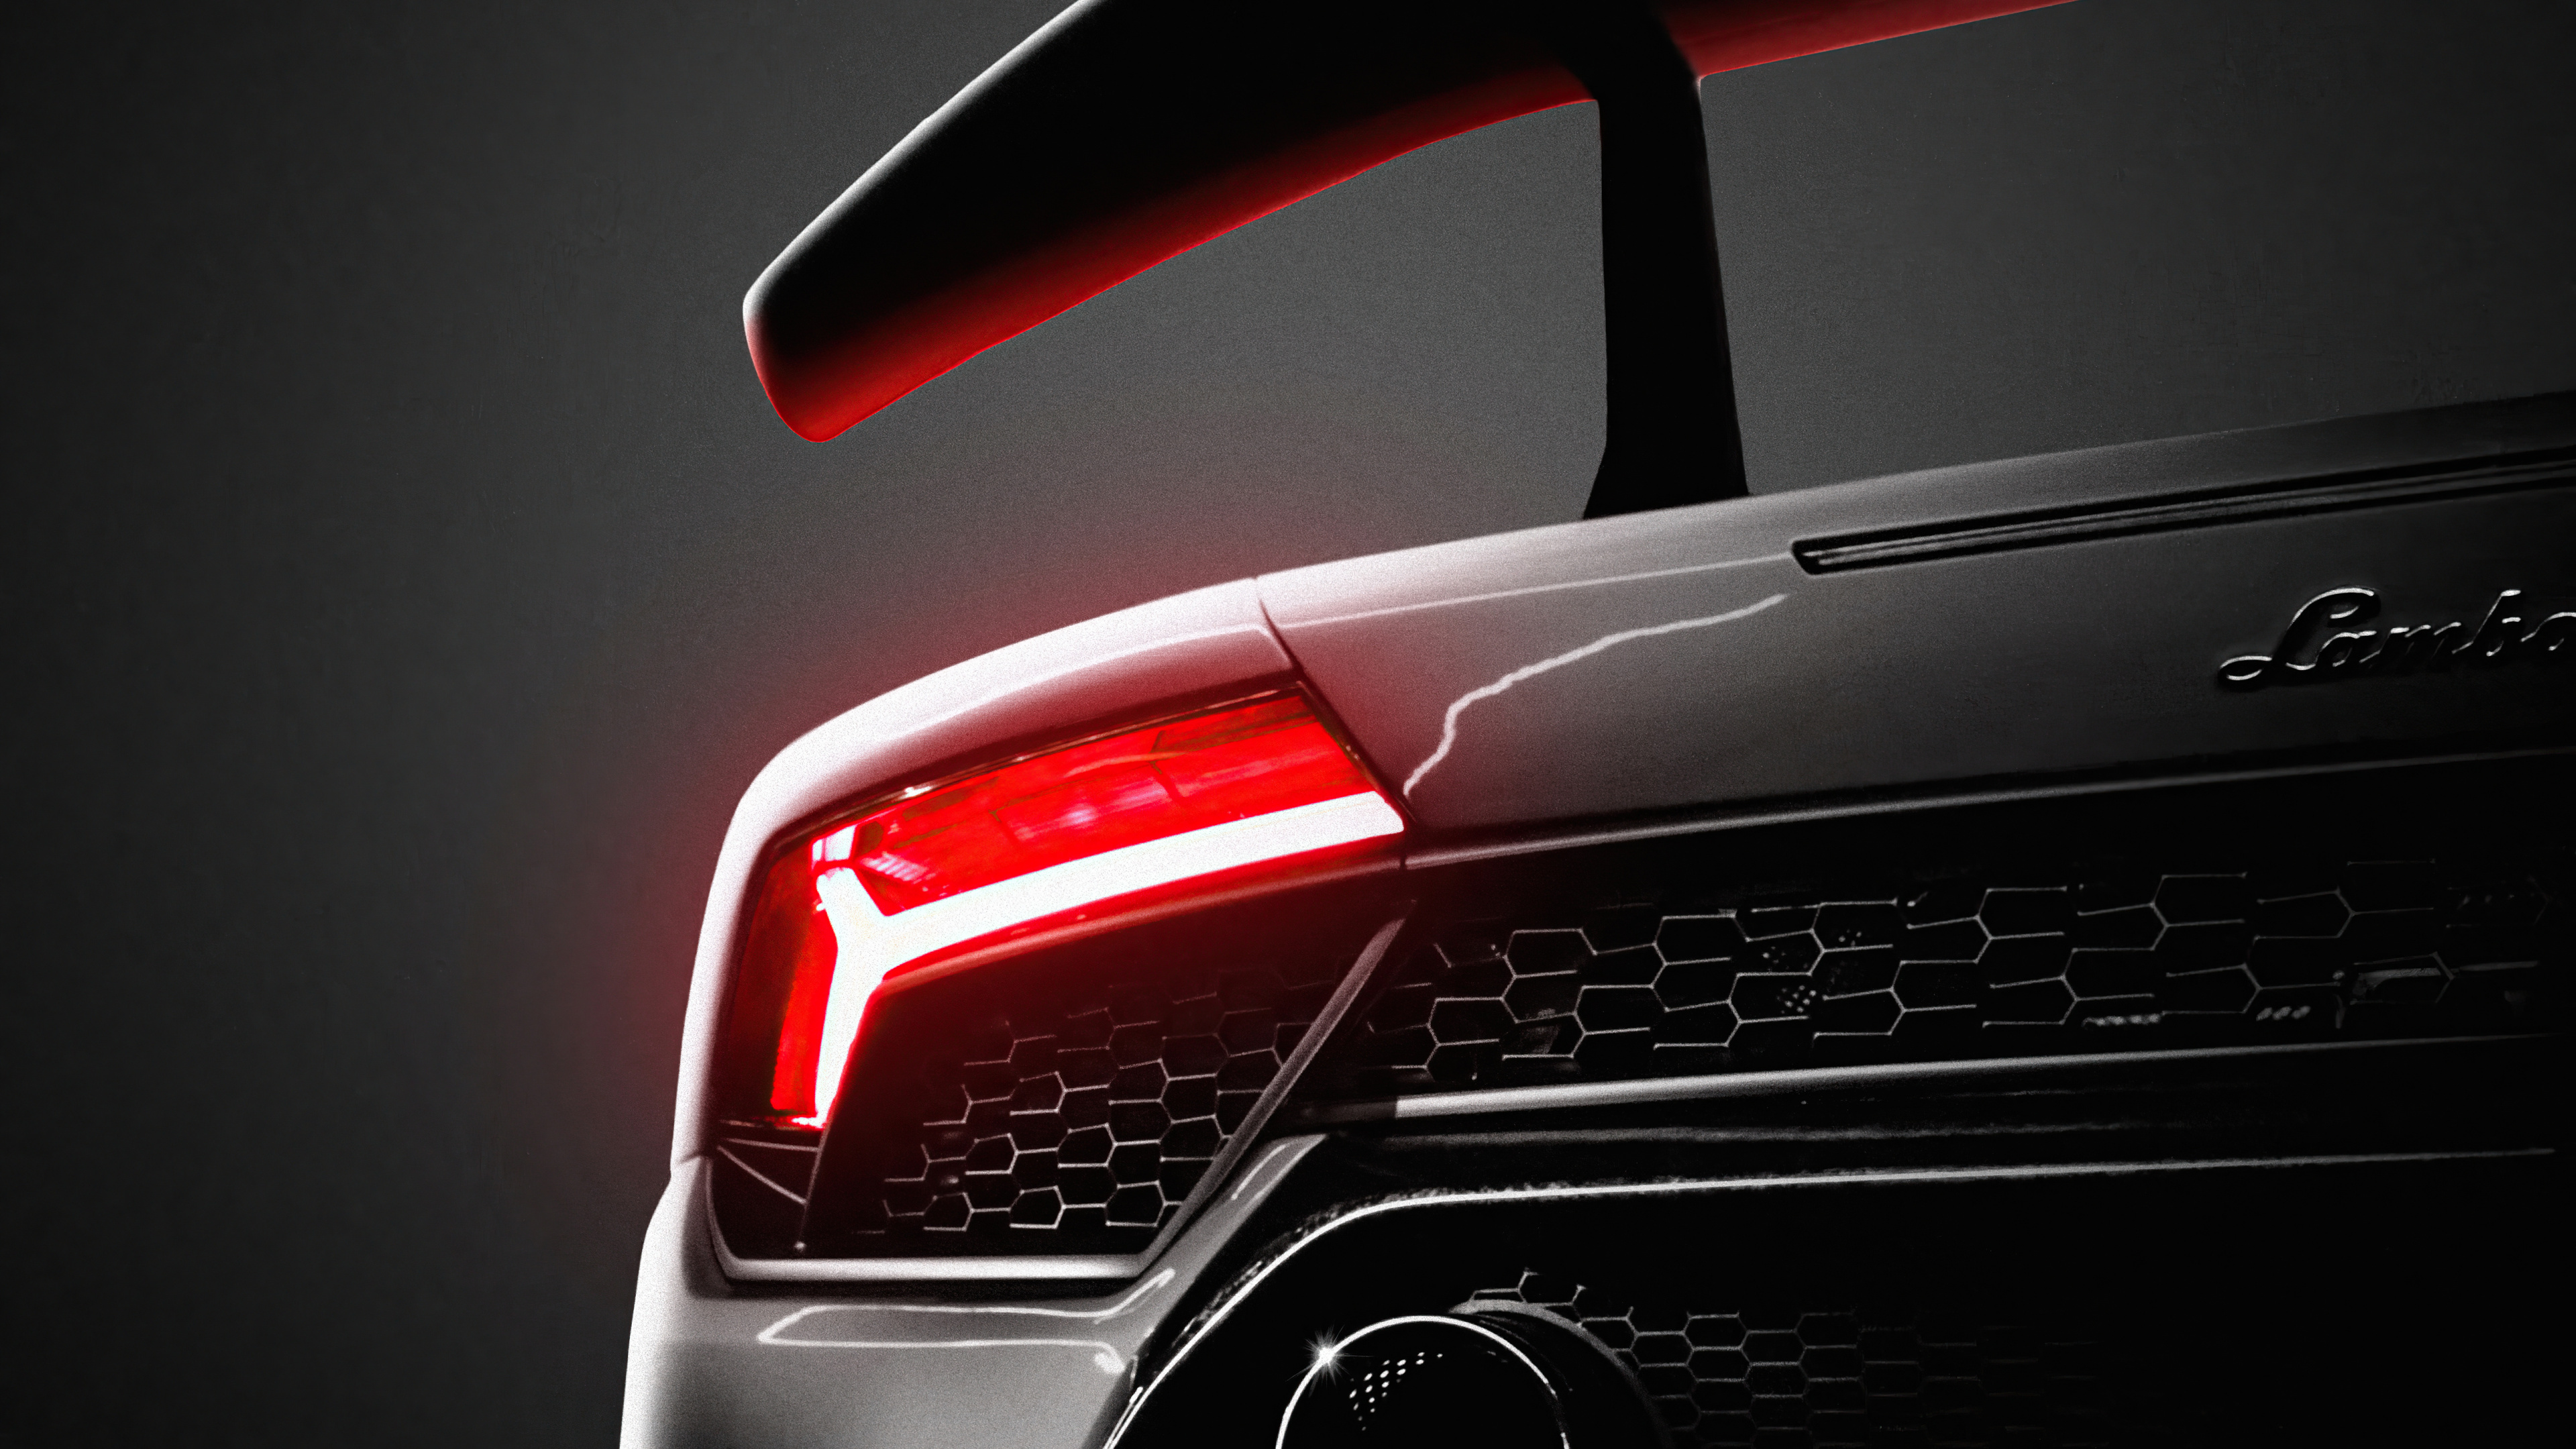 Audi r8 4K Ultra HD Wallpapers, HD Audi r8 3840x2160 Backgrounds, Free  Images Download